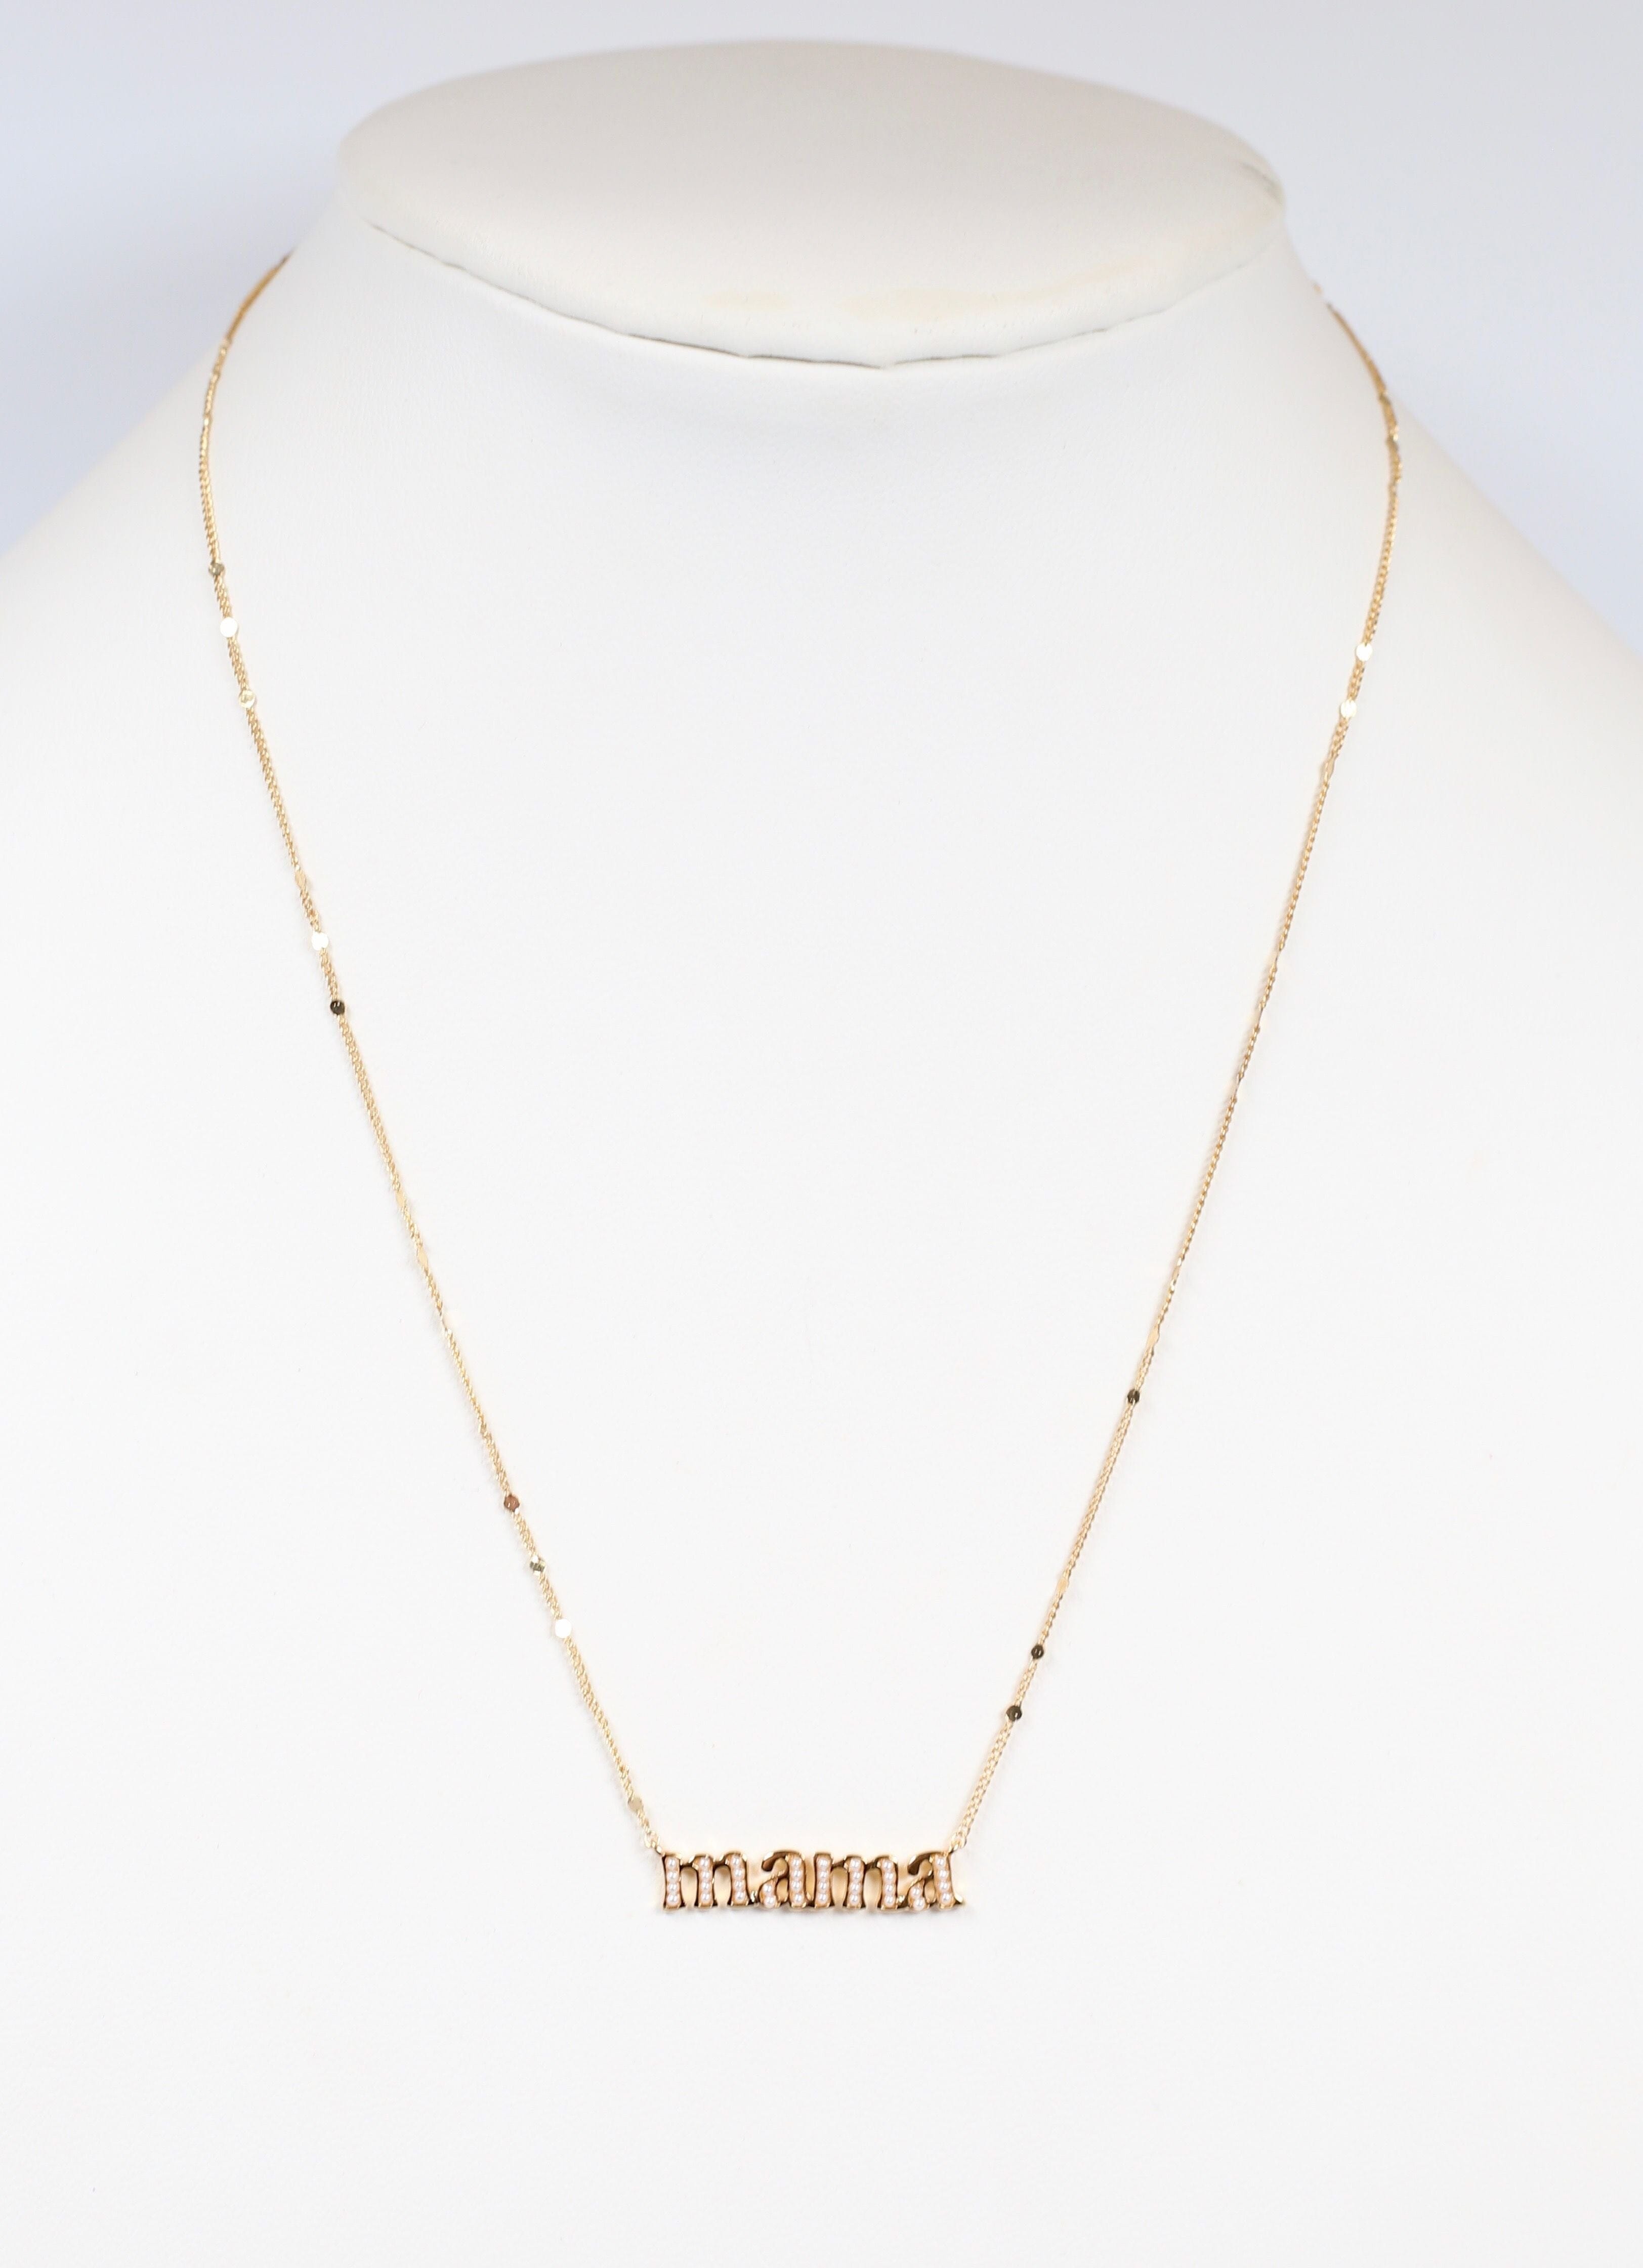 Dropship Benevolence LA Mama Necklace Dainty Necklace, 14k Gold Dipped  Necklaces For Women, Gifts For Mom | 14 Gold Necklace, Mother's Necklace,  Necklaces For Mom, Designed In California to Sell Online at